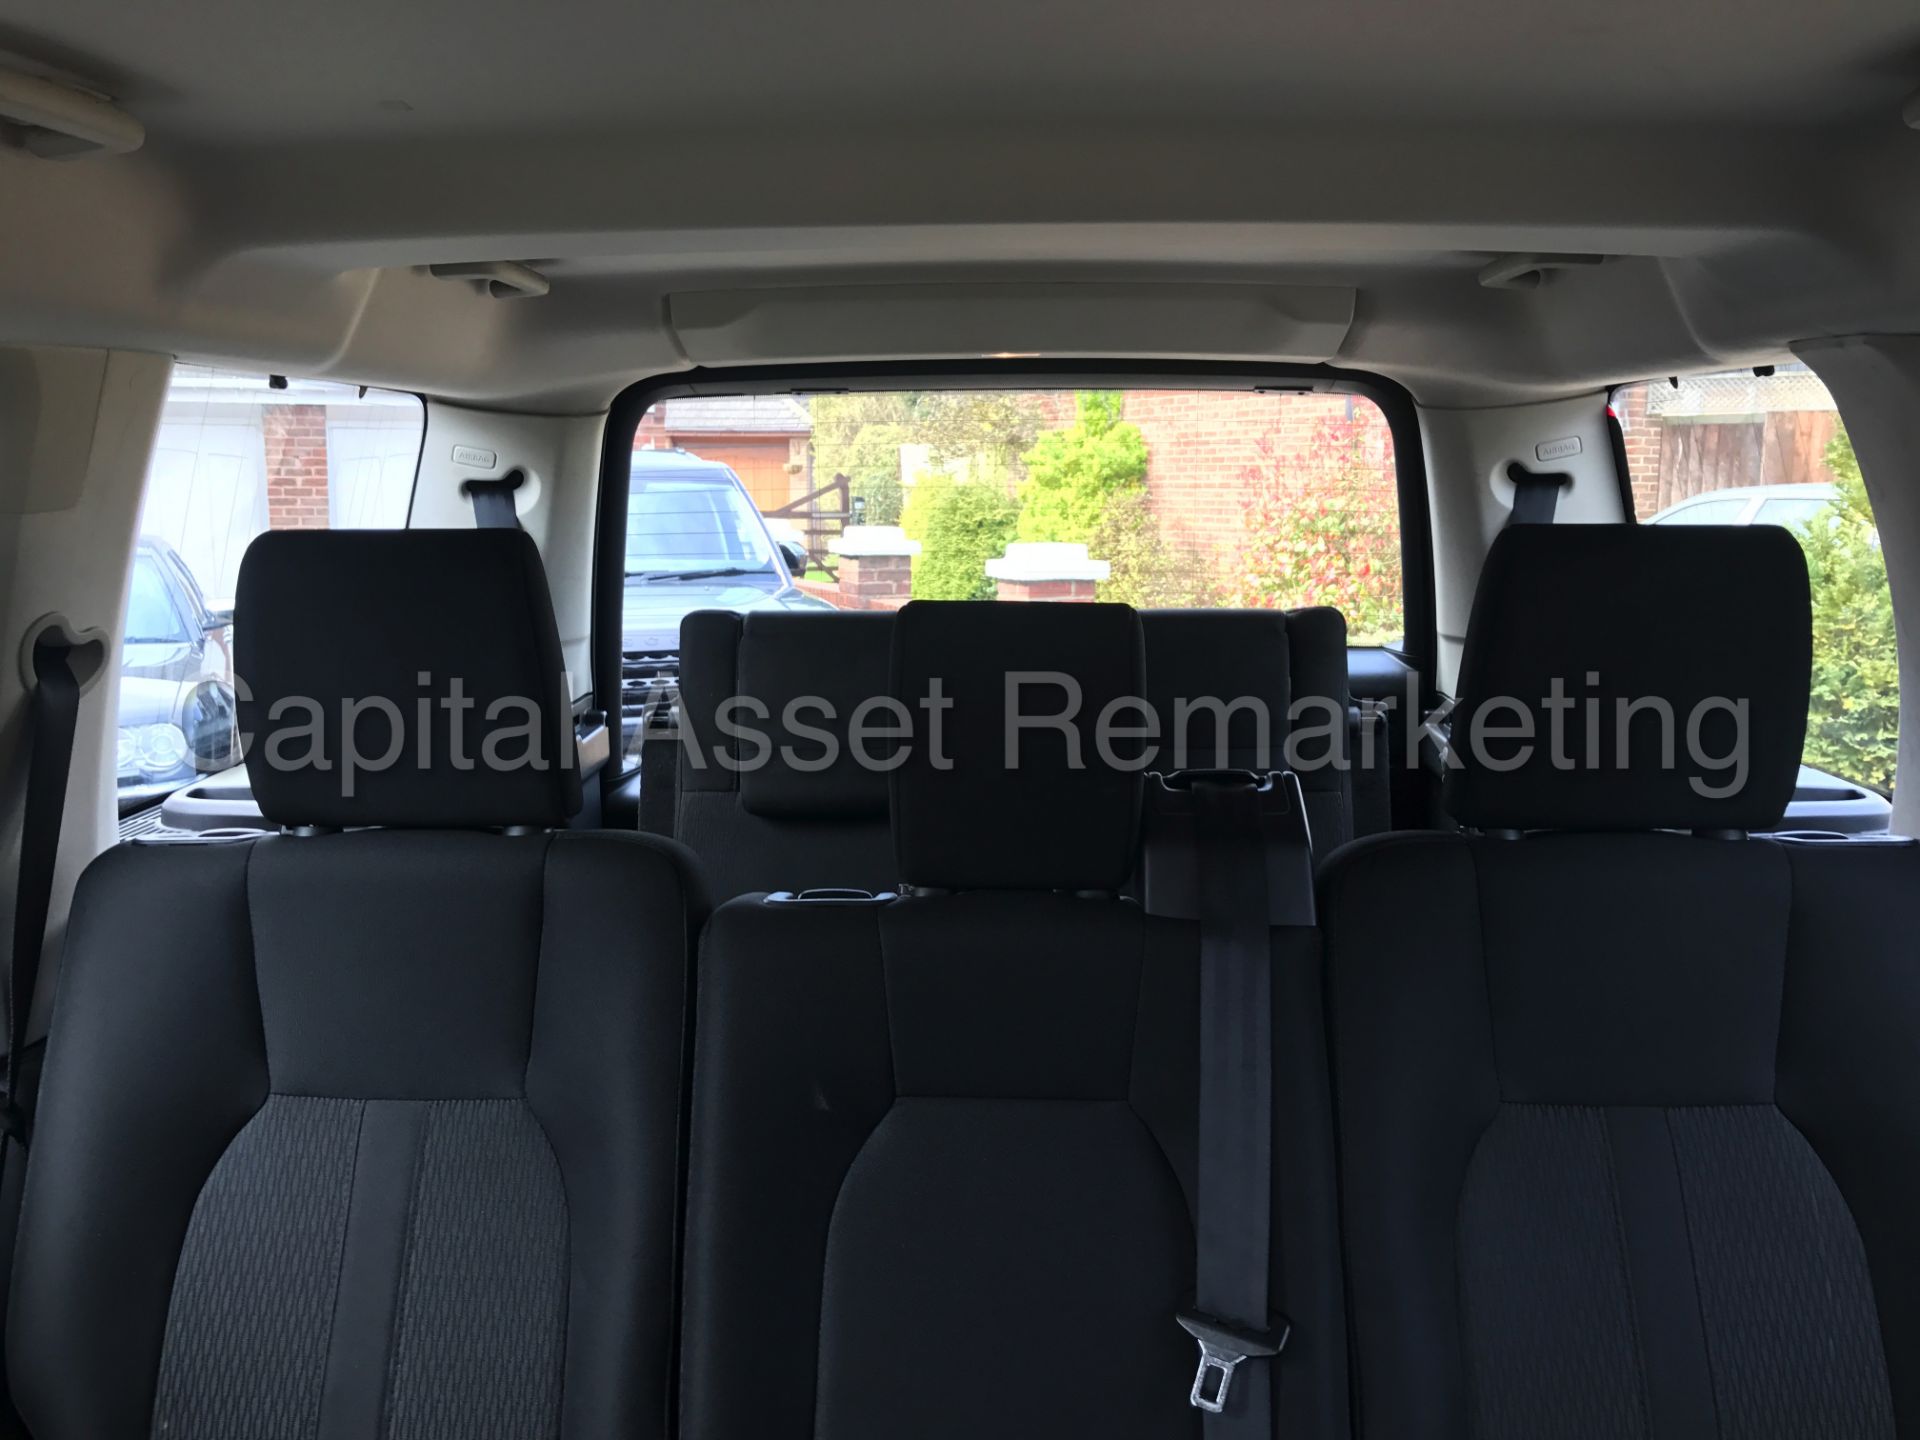 LAND ROVER DISCOVERY 4 (2014 MODEL) '3.0 SDV6 - 8 SPEED AUTO - 7 SEATER' **HUGE SPEC** (1 OWNER) - Image 23 of 30